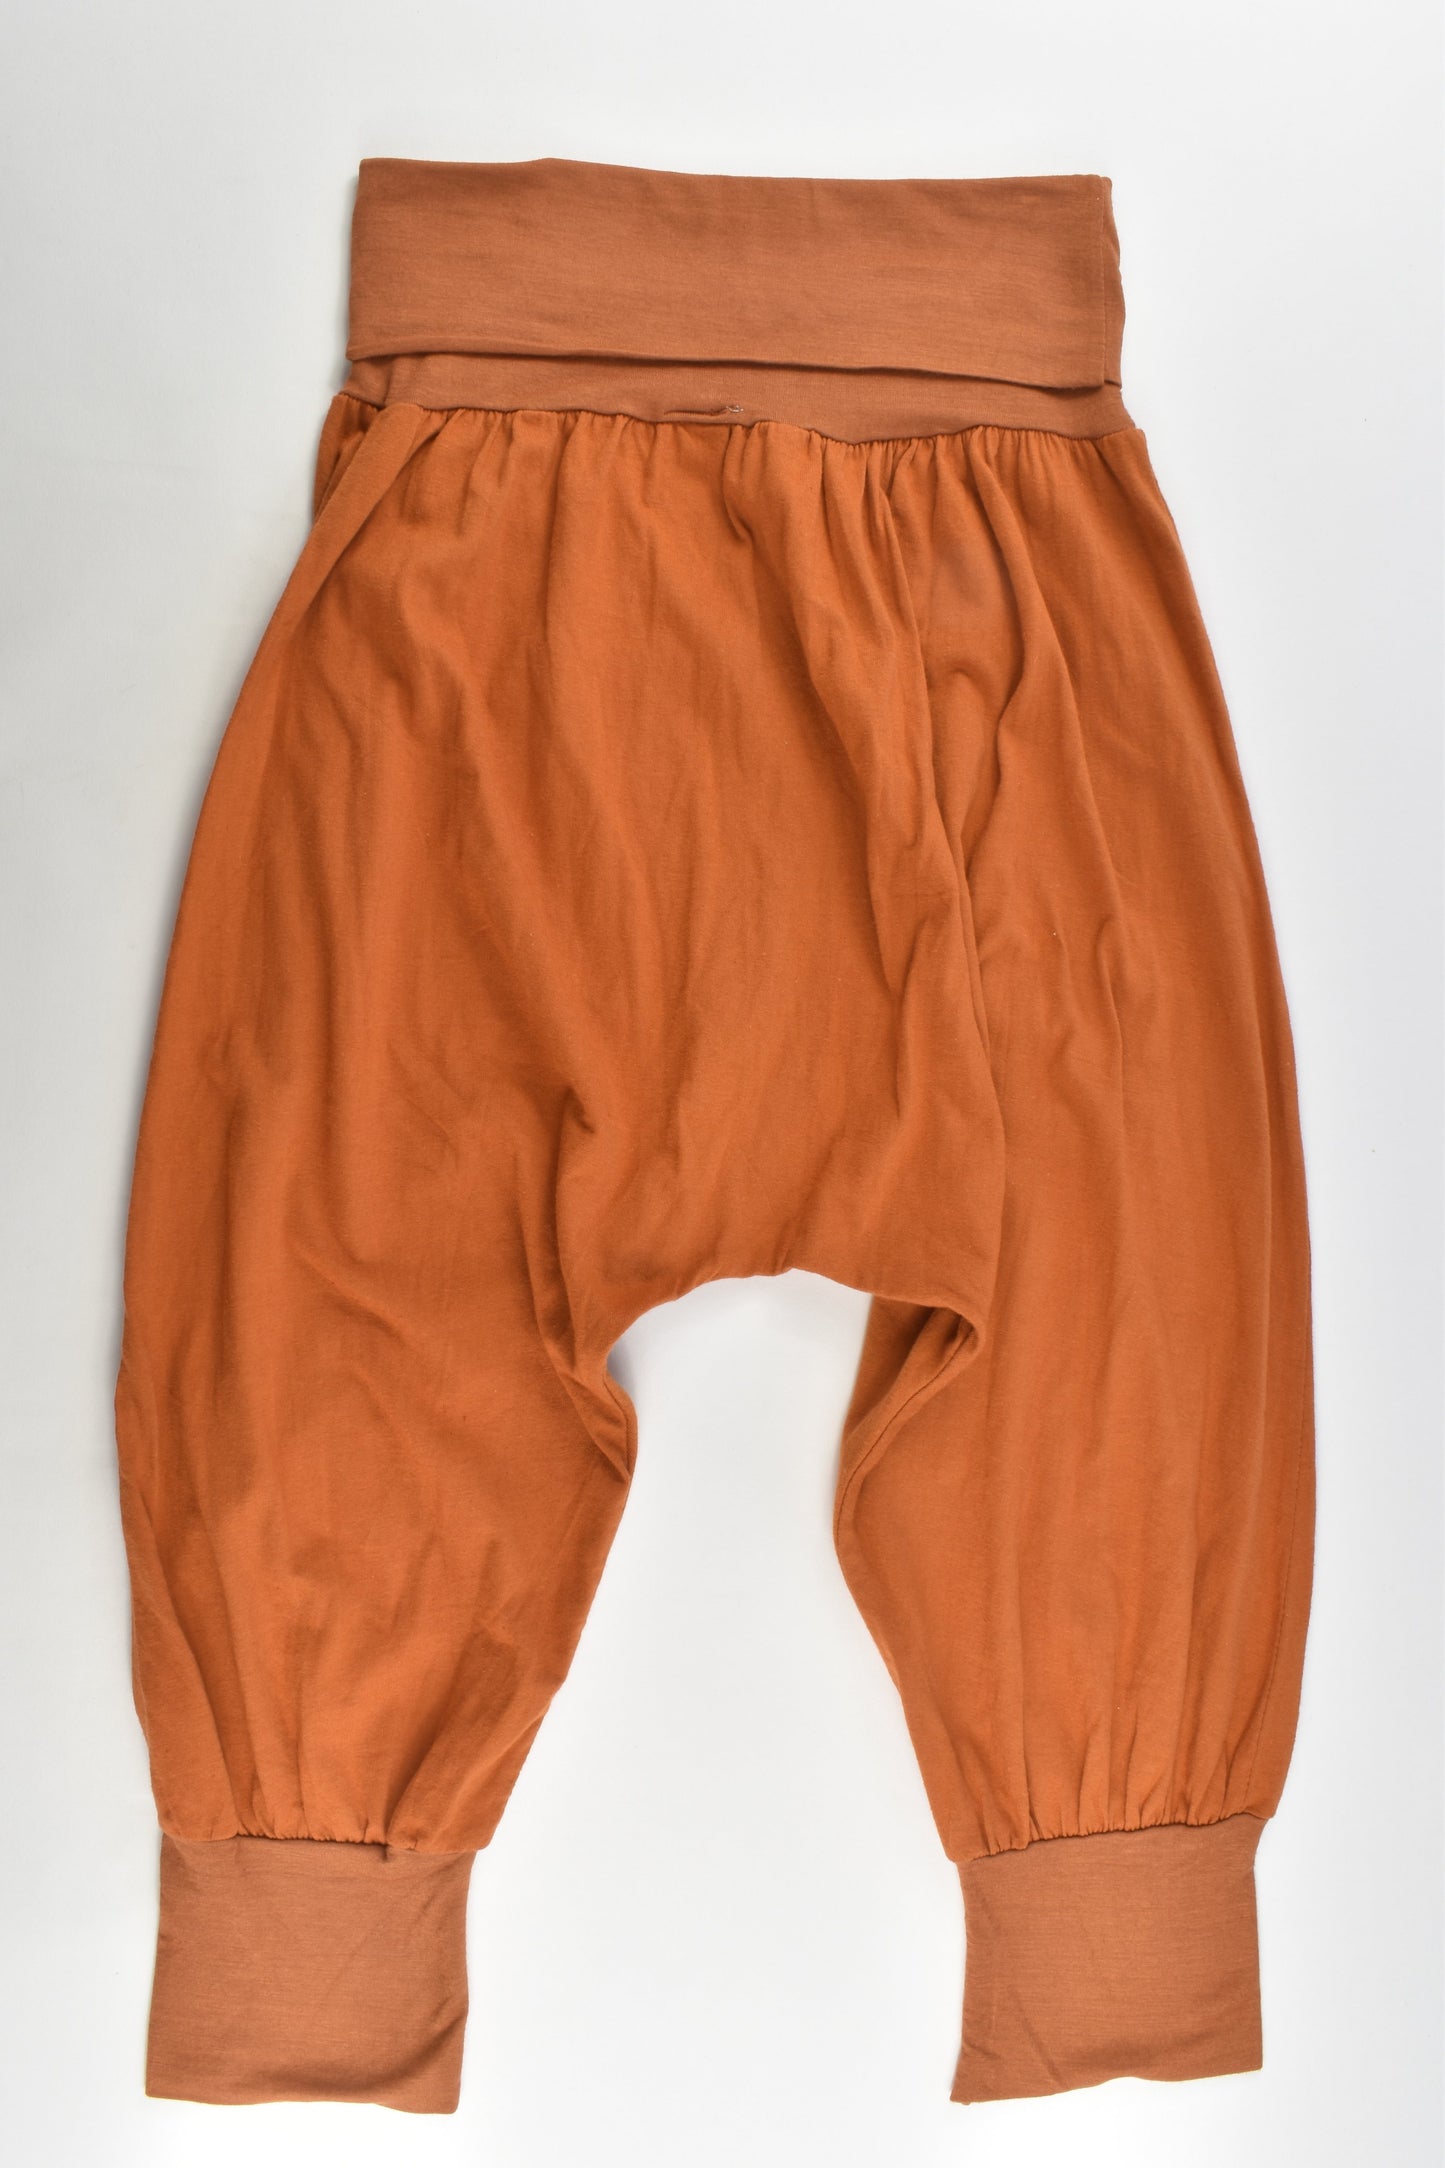 Brand Unknown (Nepal) Size approx 8-10 Lightweight Baggy Pants